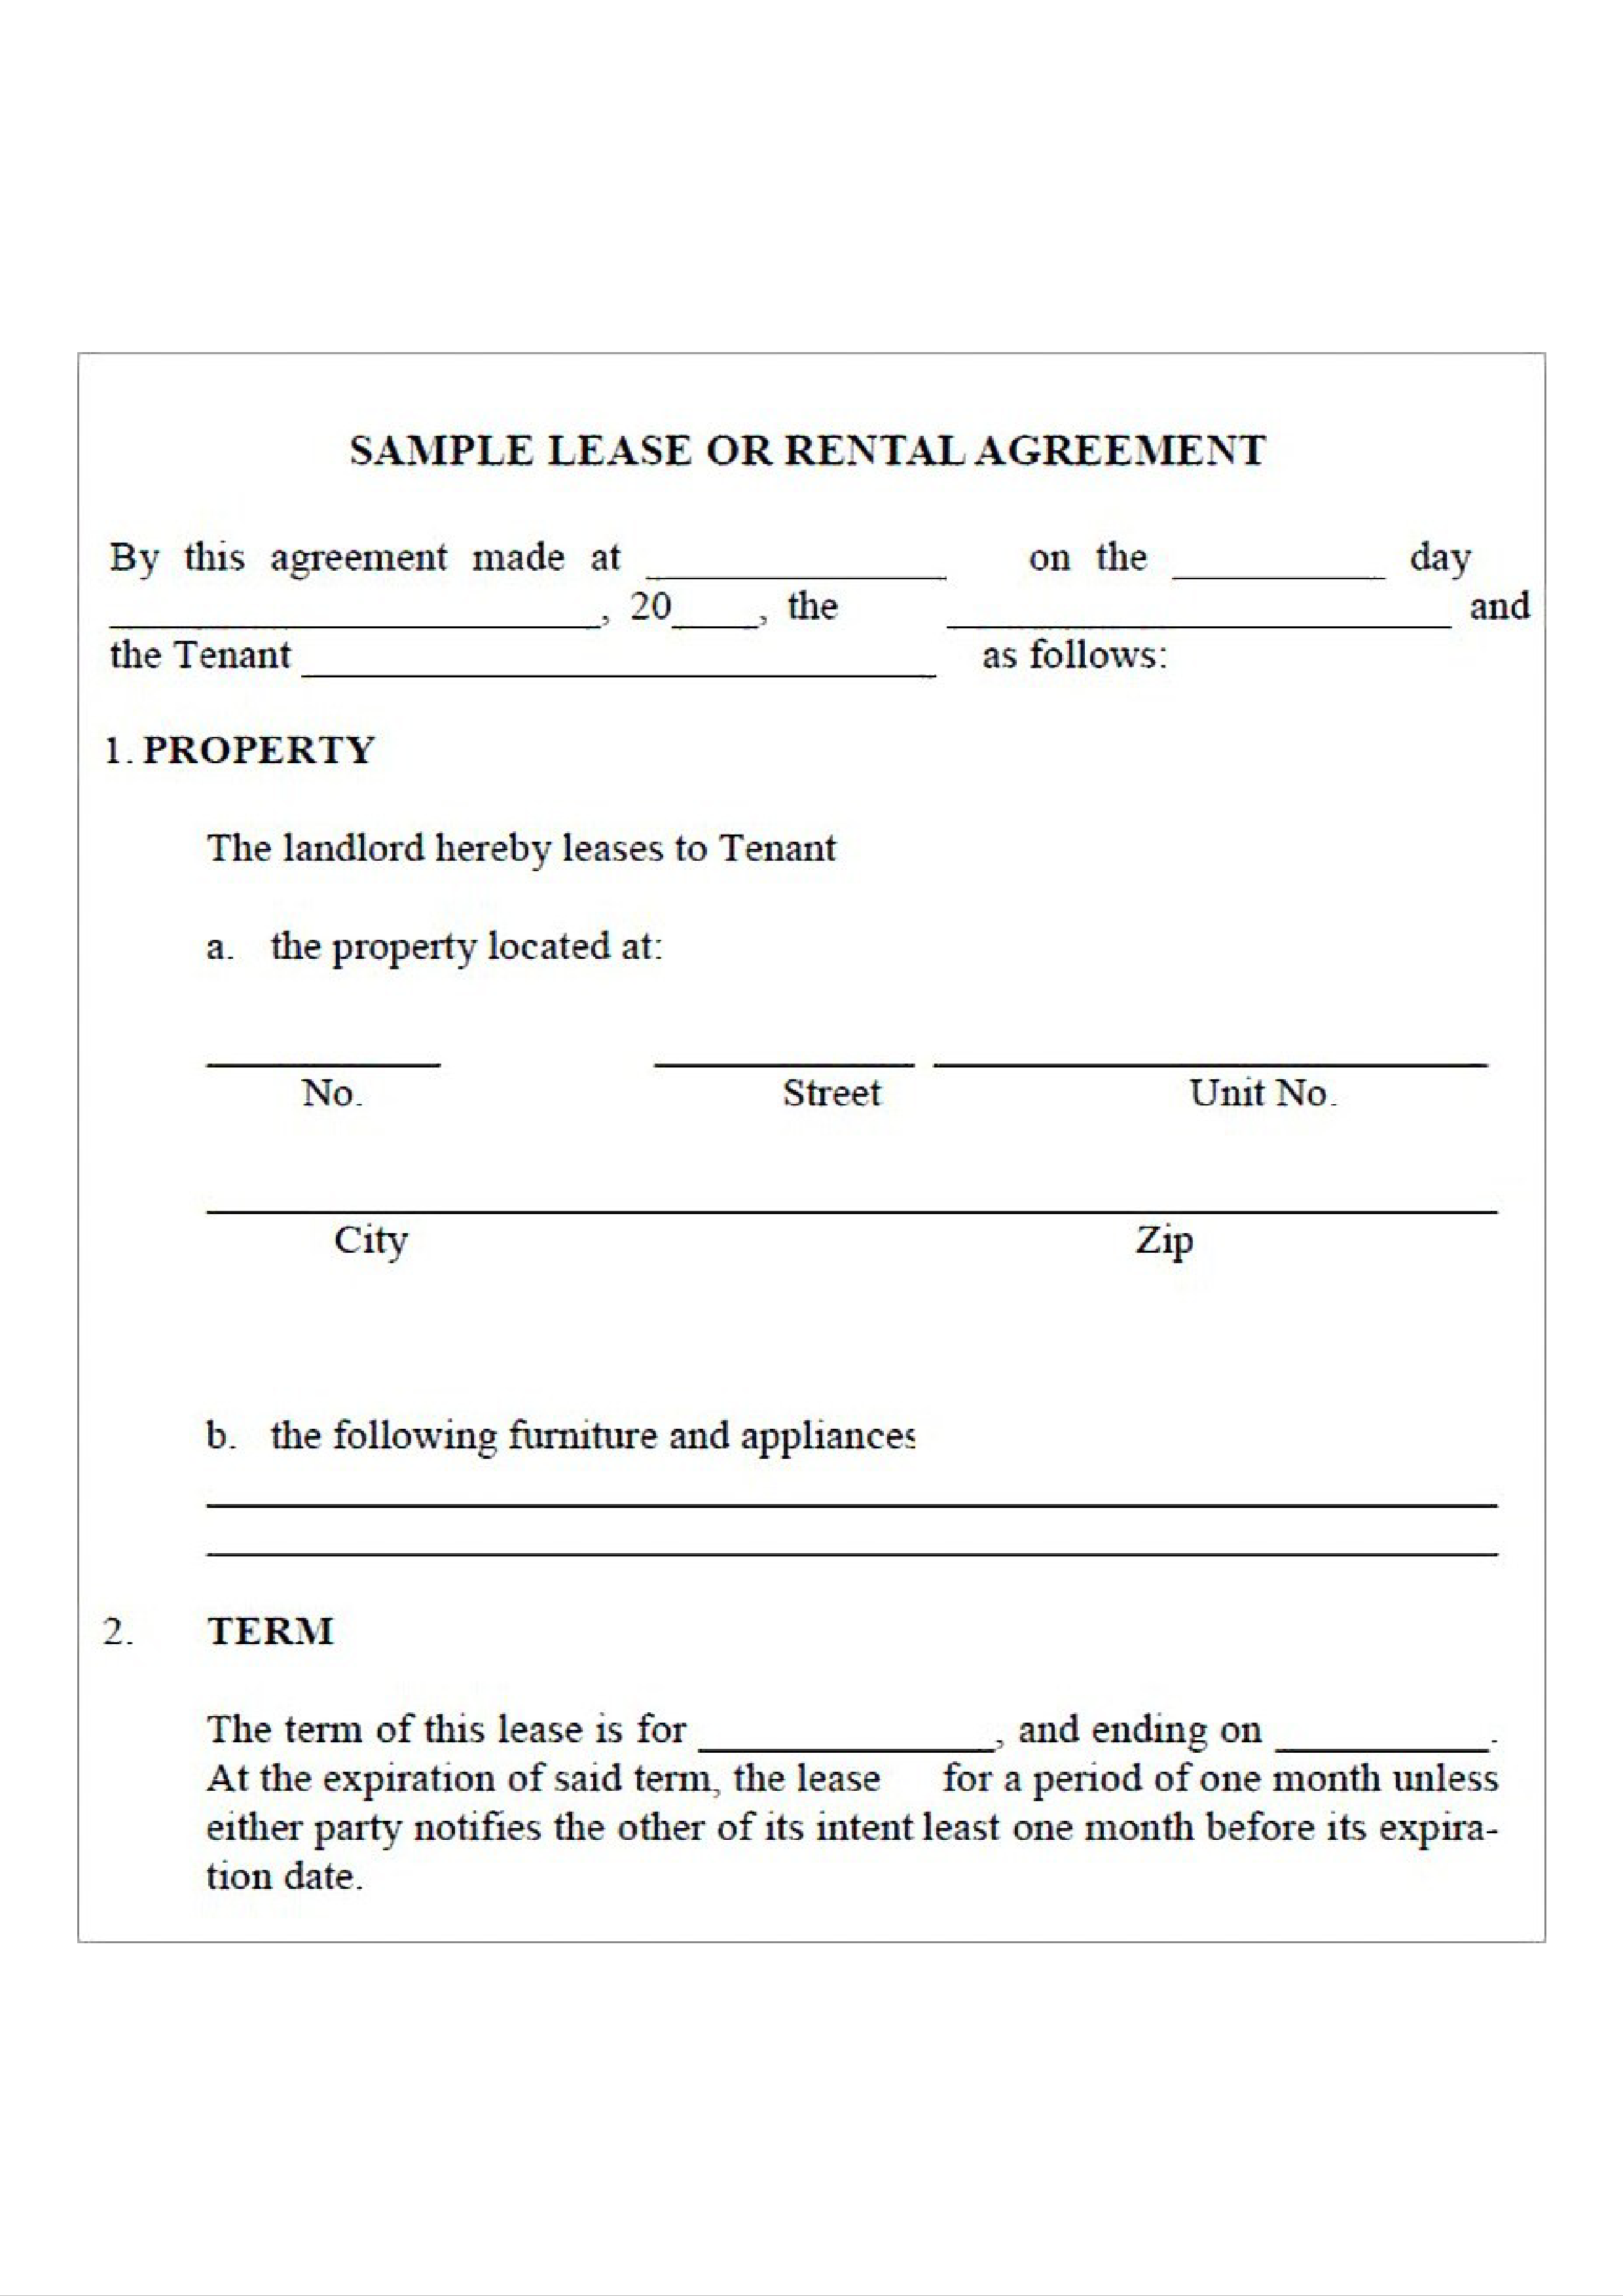 free-rental-lease-agreement-templates-13-word-pdf-eforms-free-and